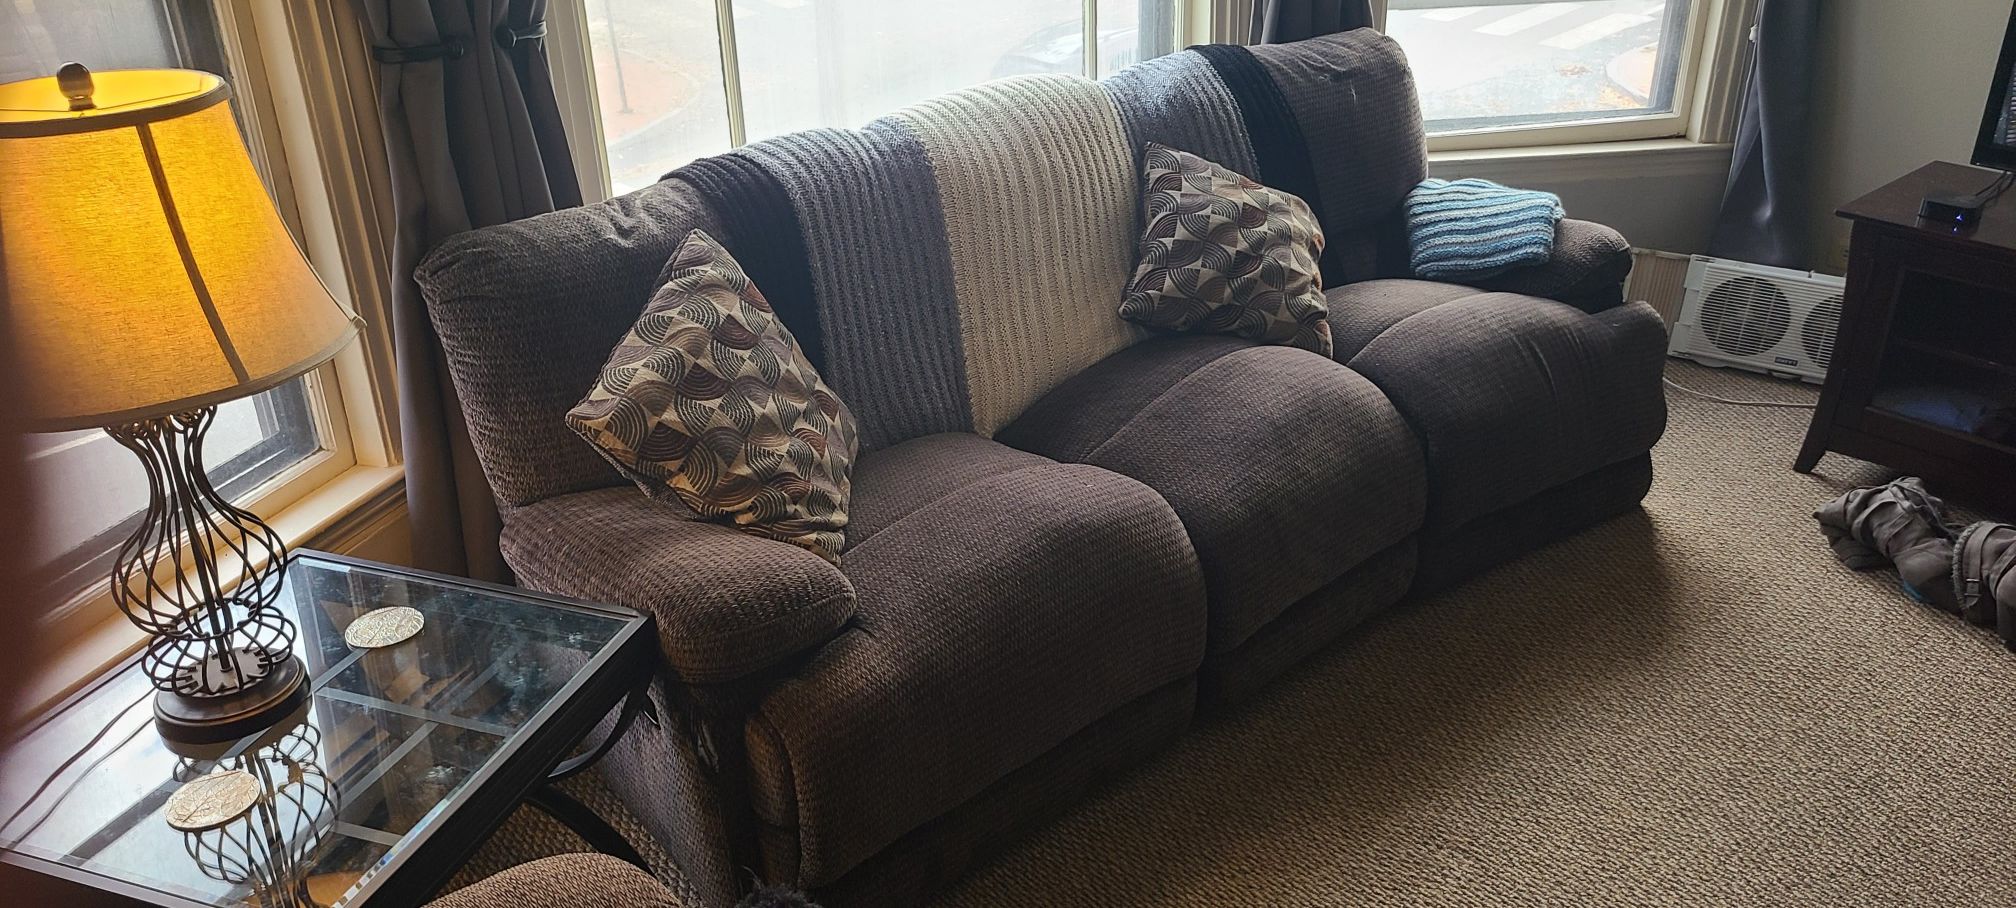 Large 3 seat recliner couch